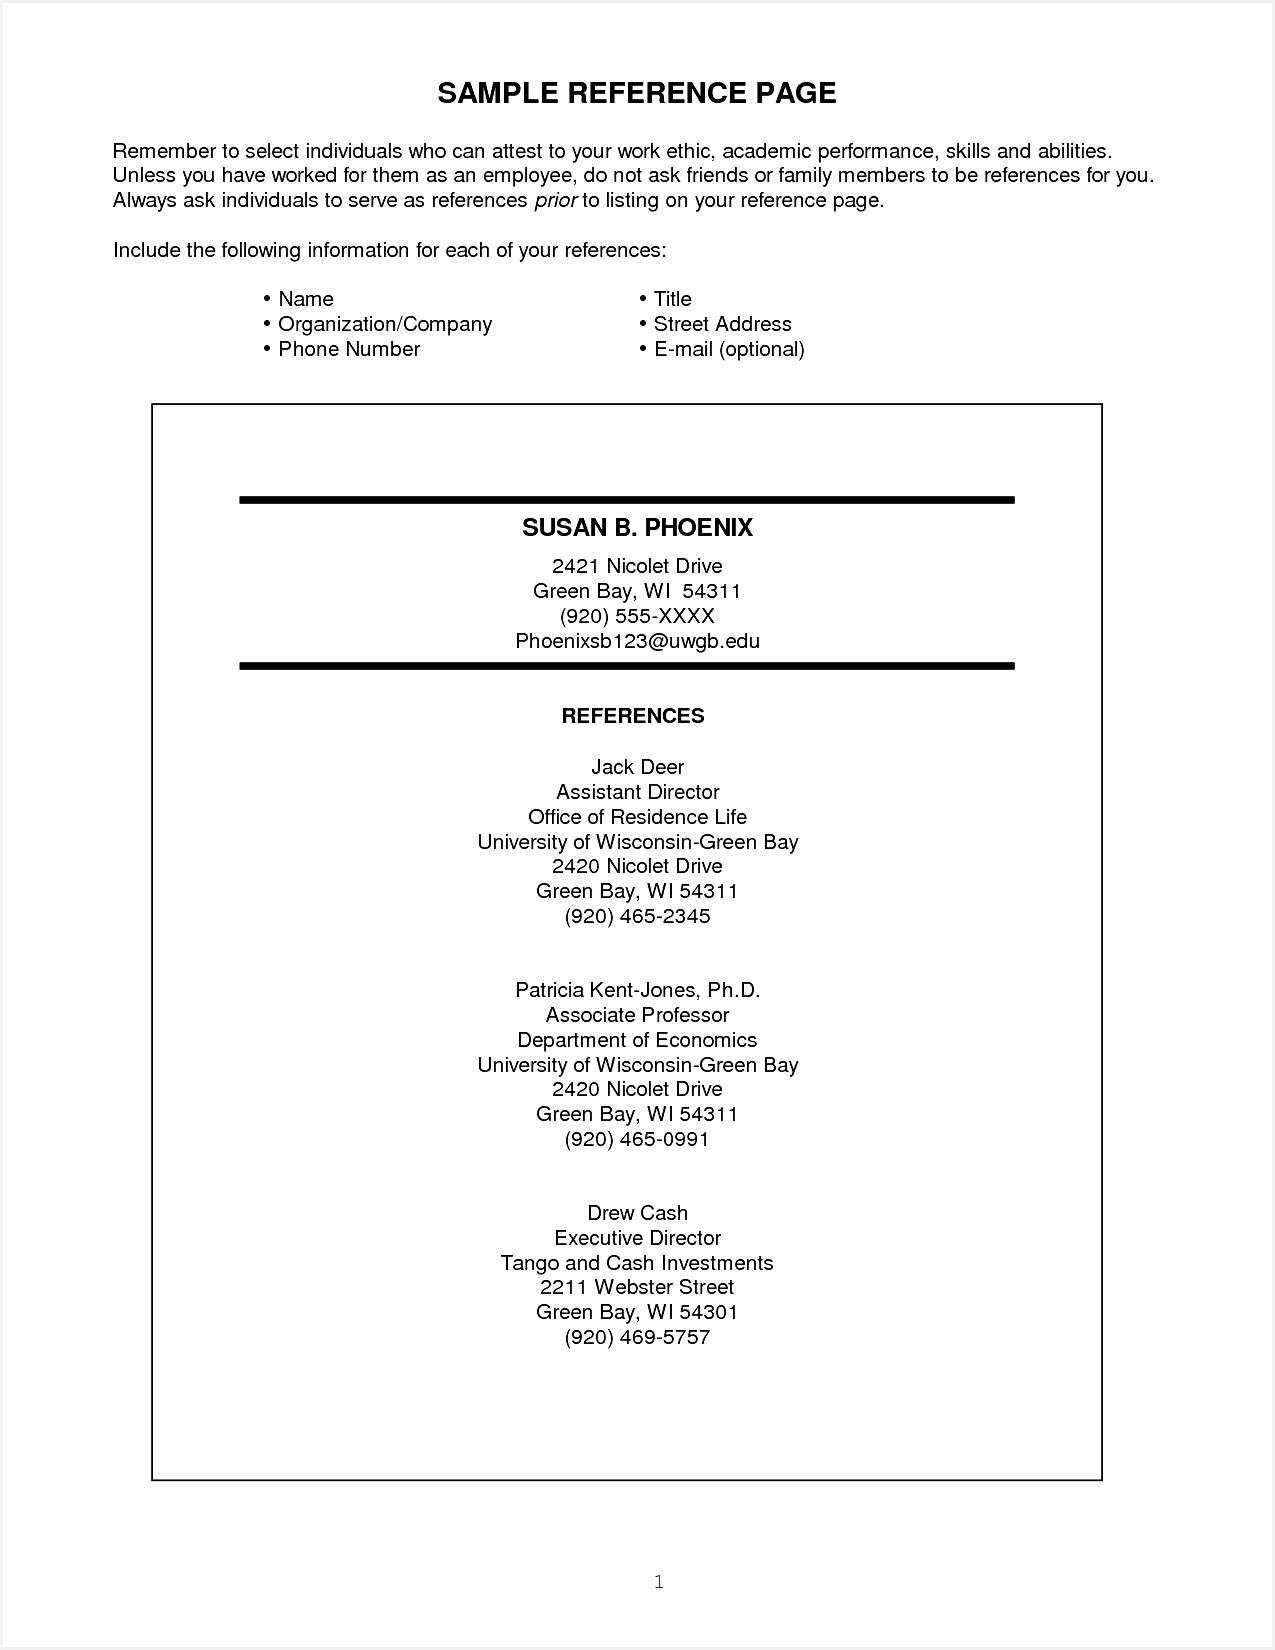 Free Resume Templates Google Docs Beautiful Reference Sample for Resume Resume Reference Page 21 Luxury16501275